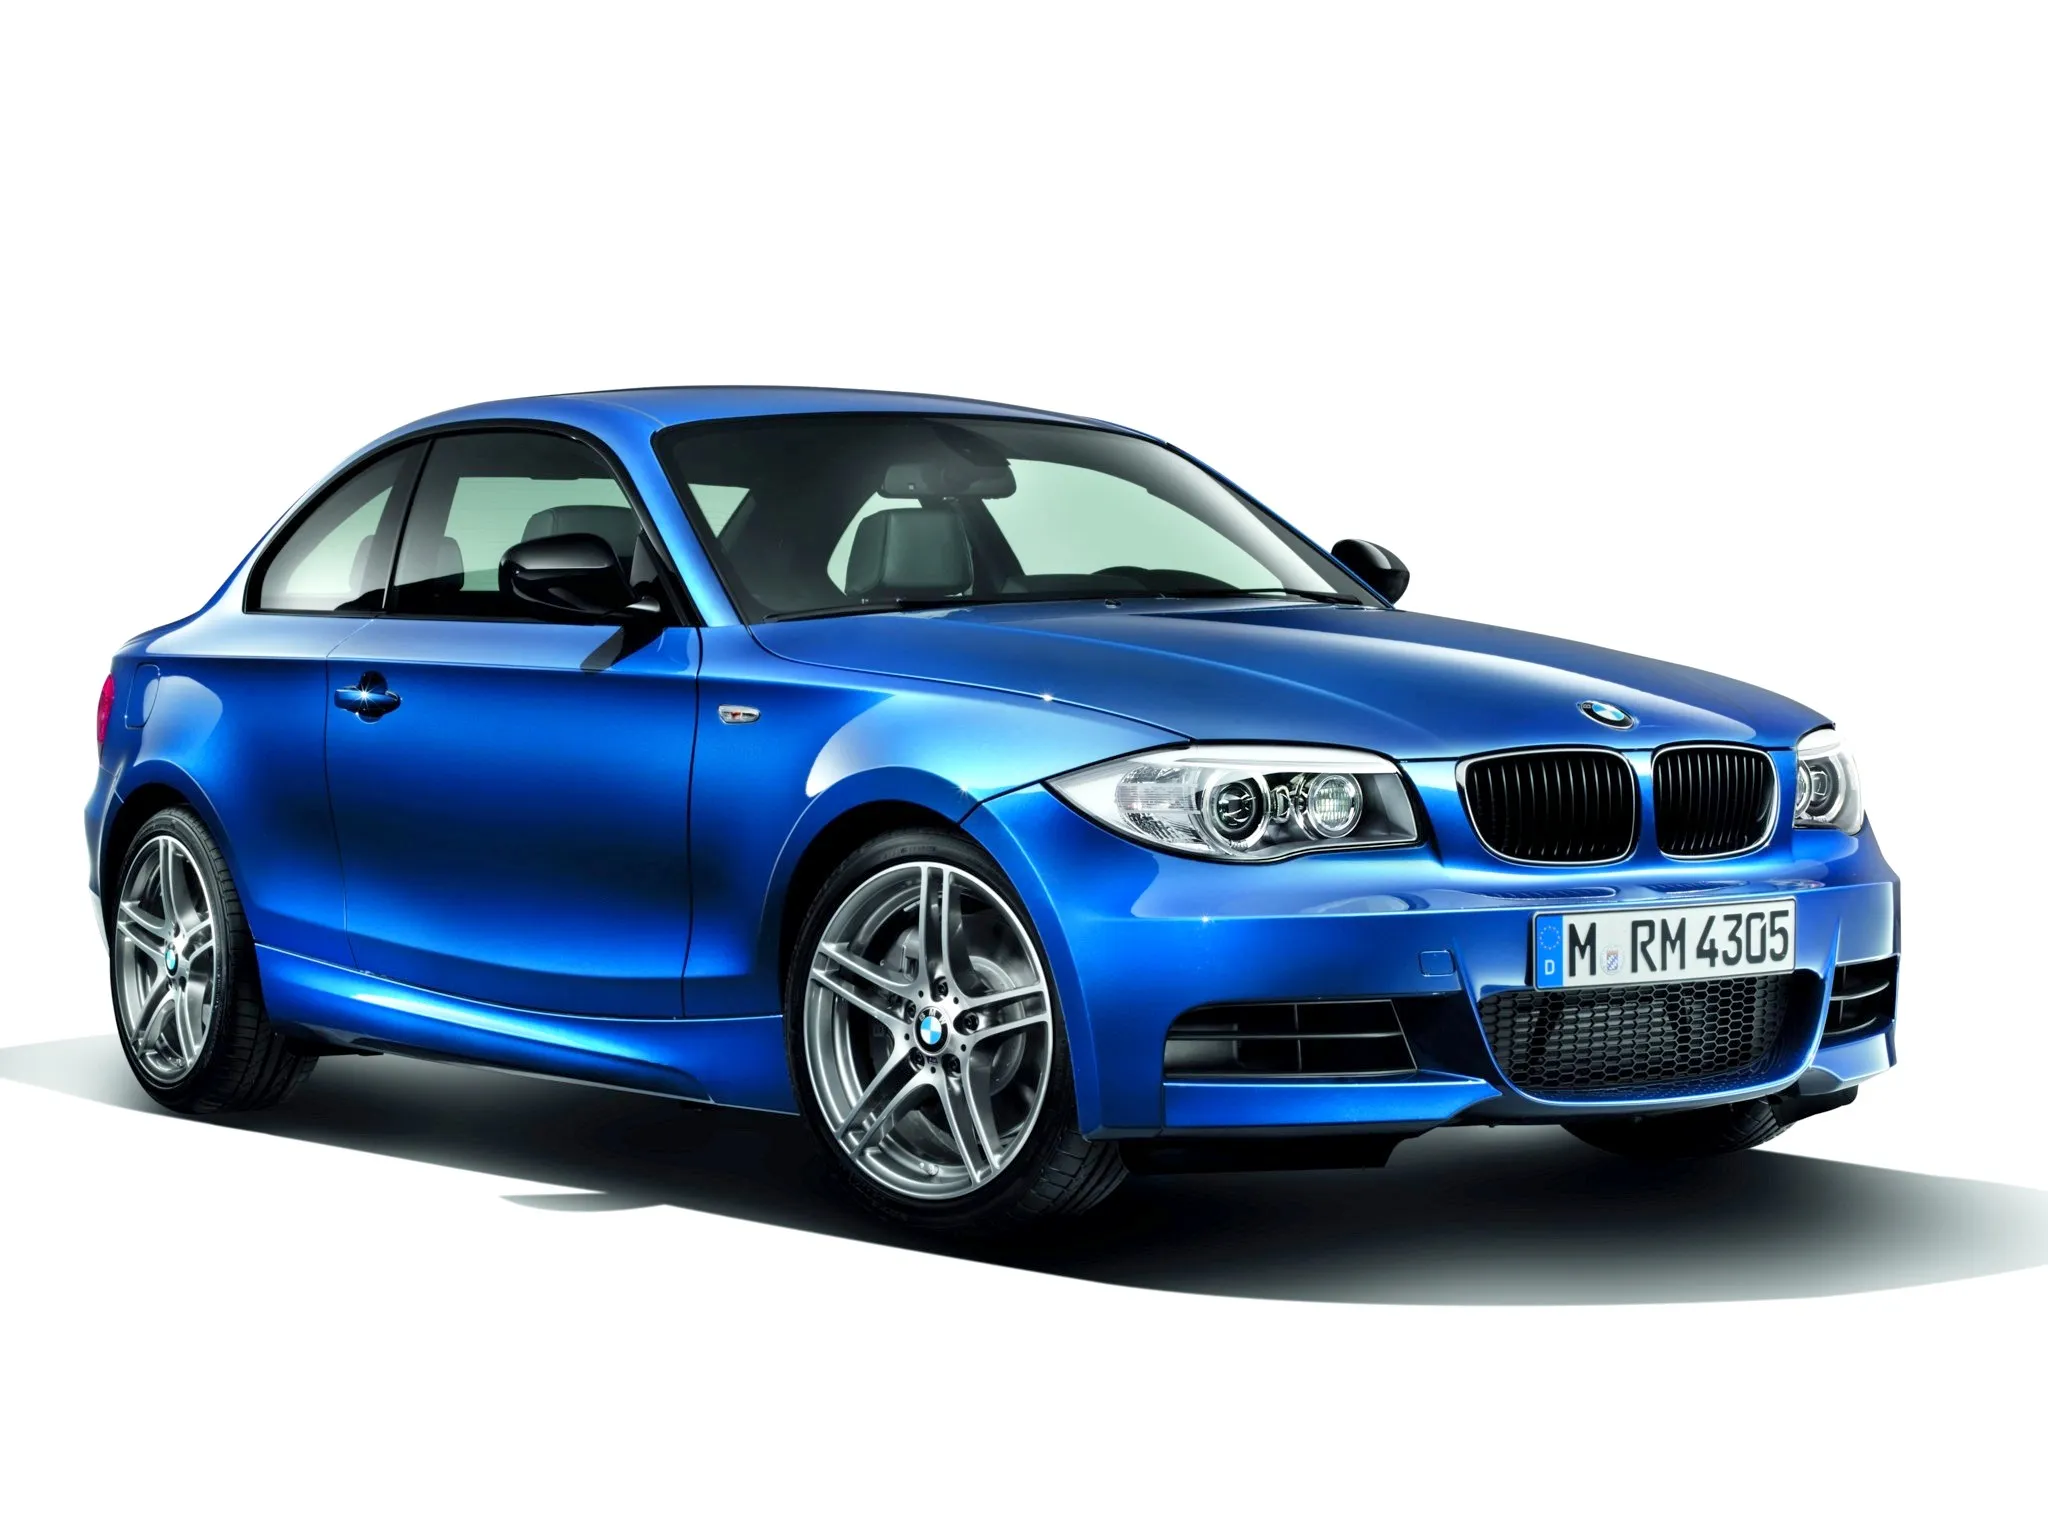 BMW 1 series 135is 2012 photo - 1